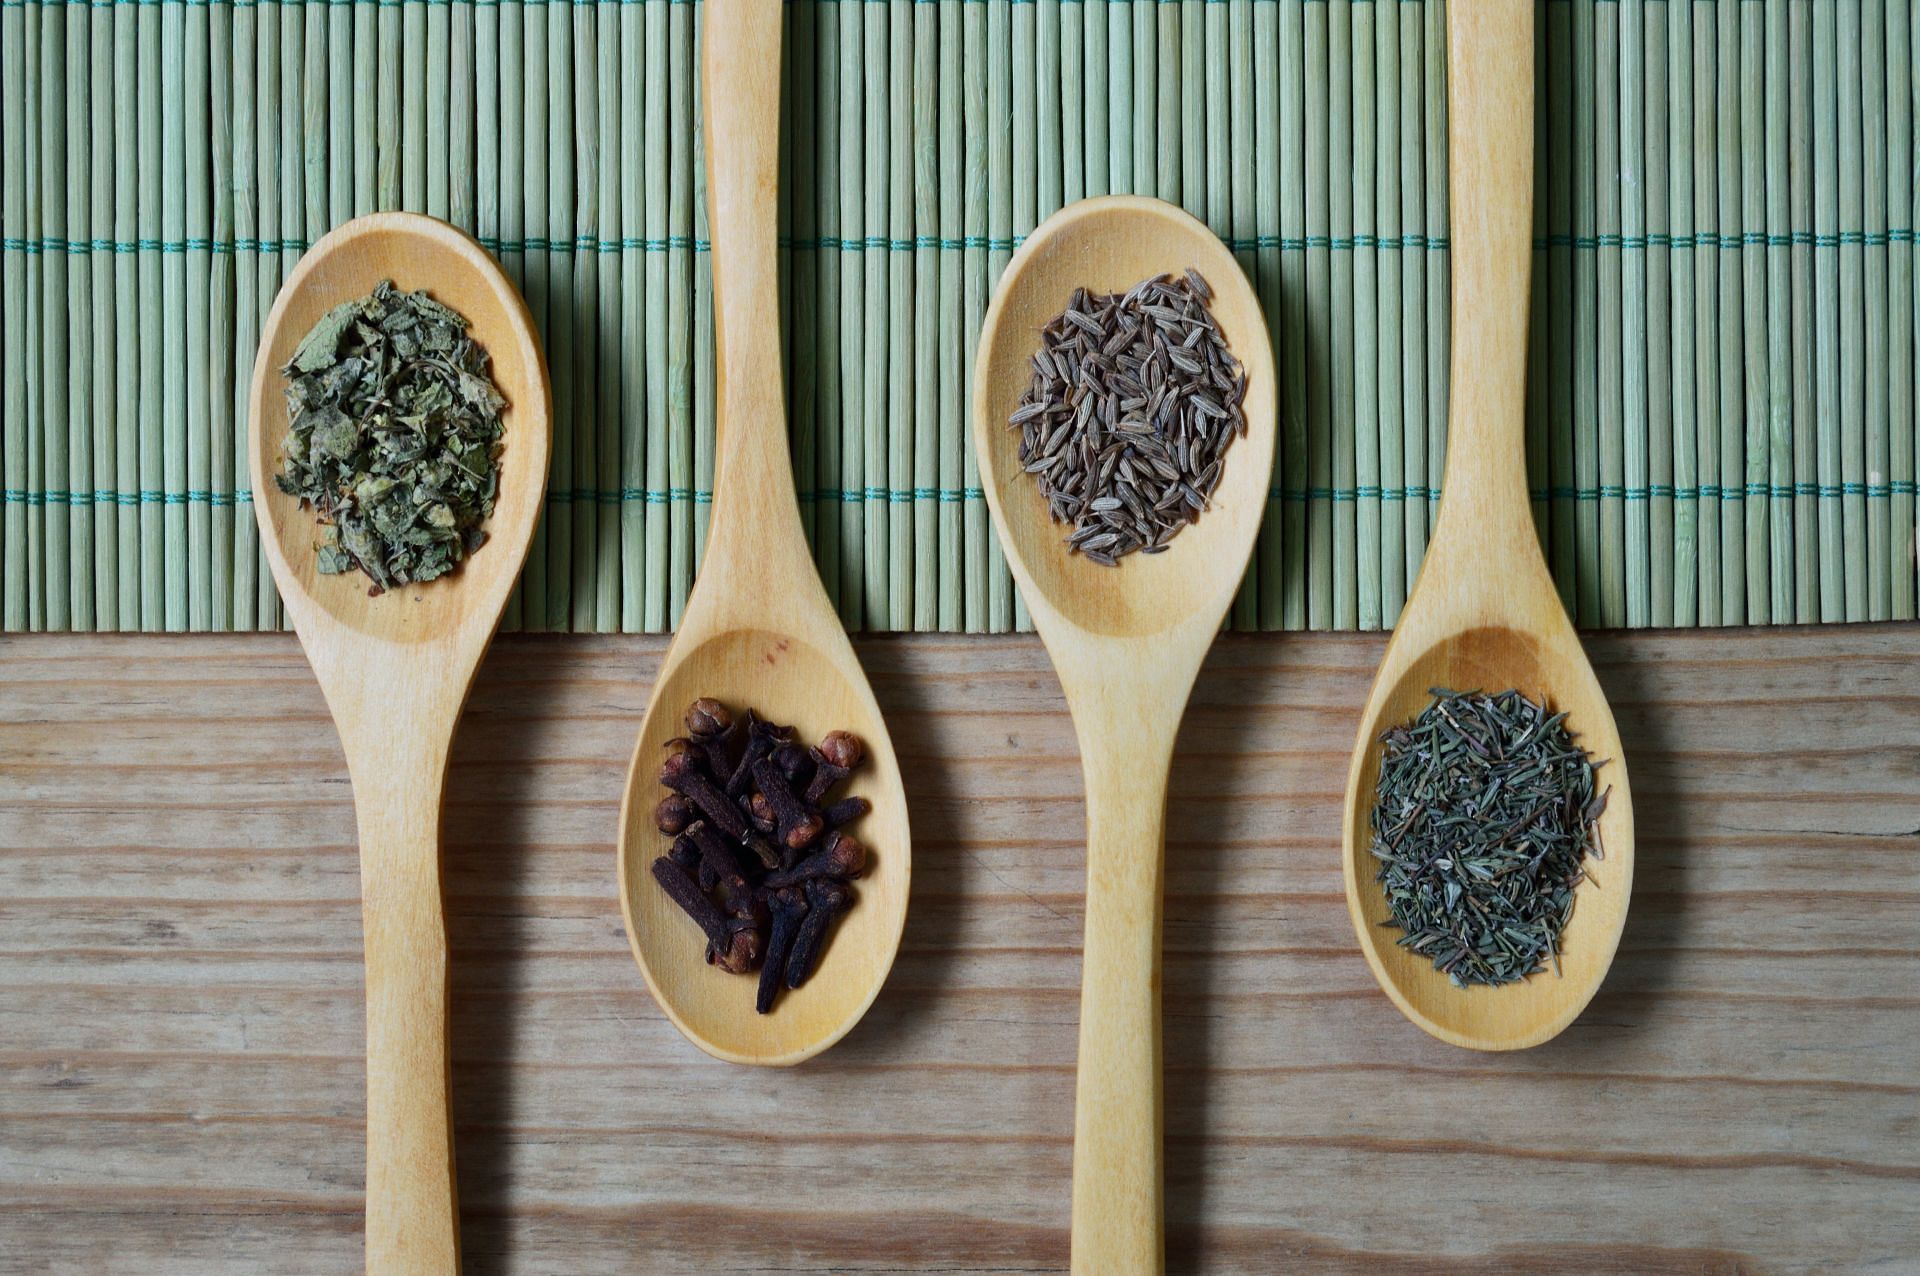 Importance of herbs (image sourced via Pexels / Photo by miguel)